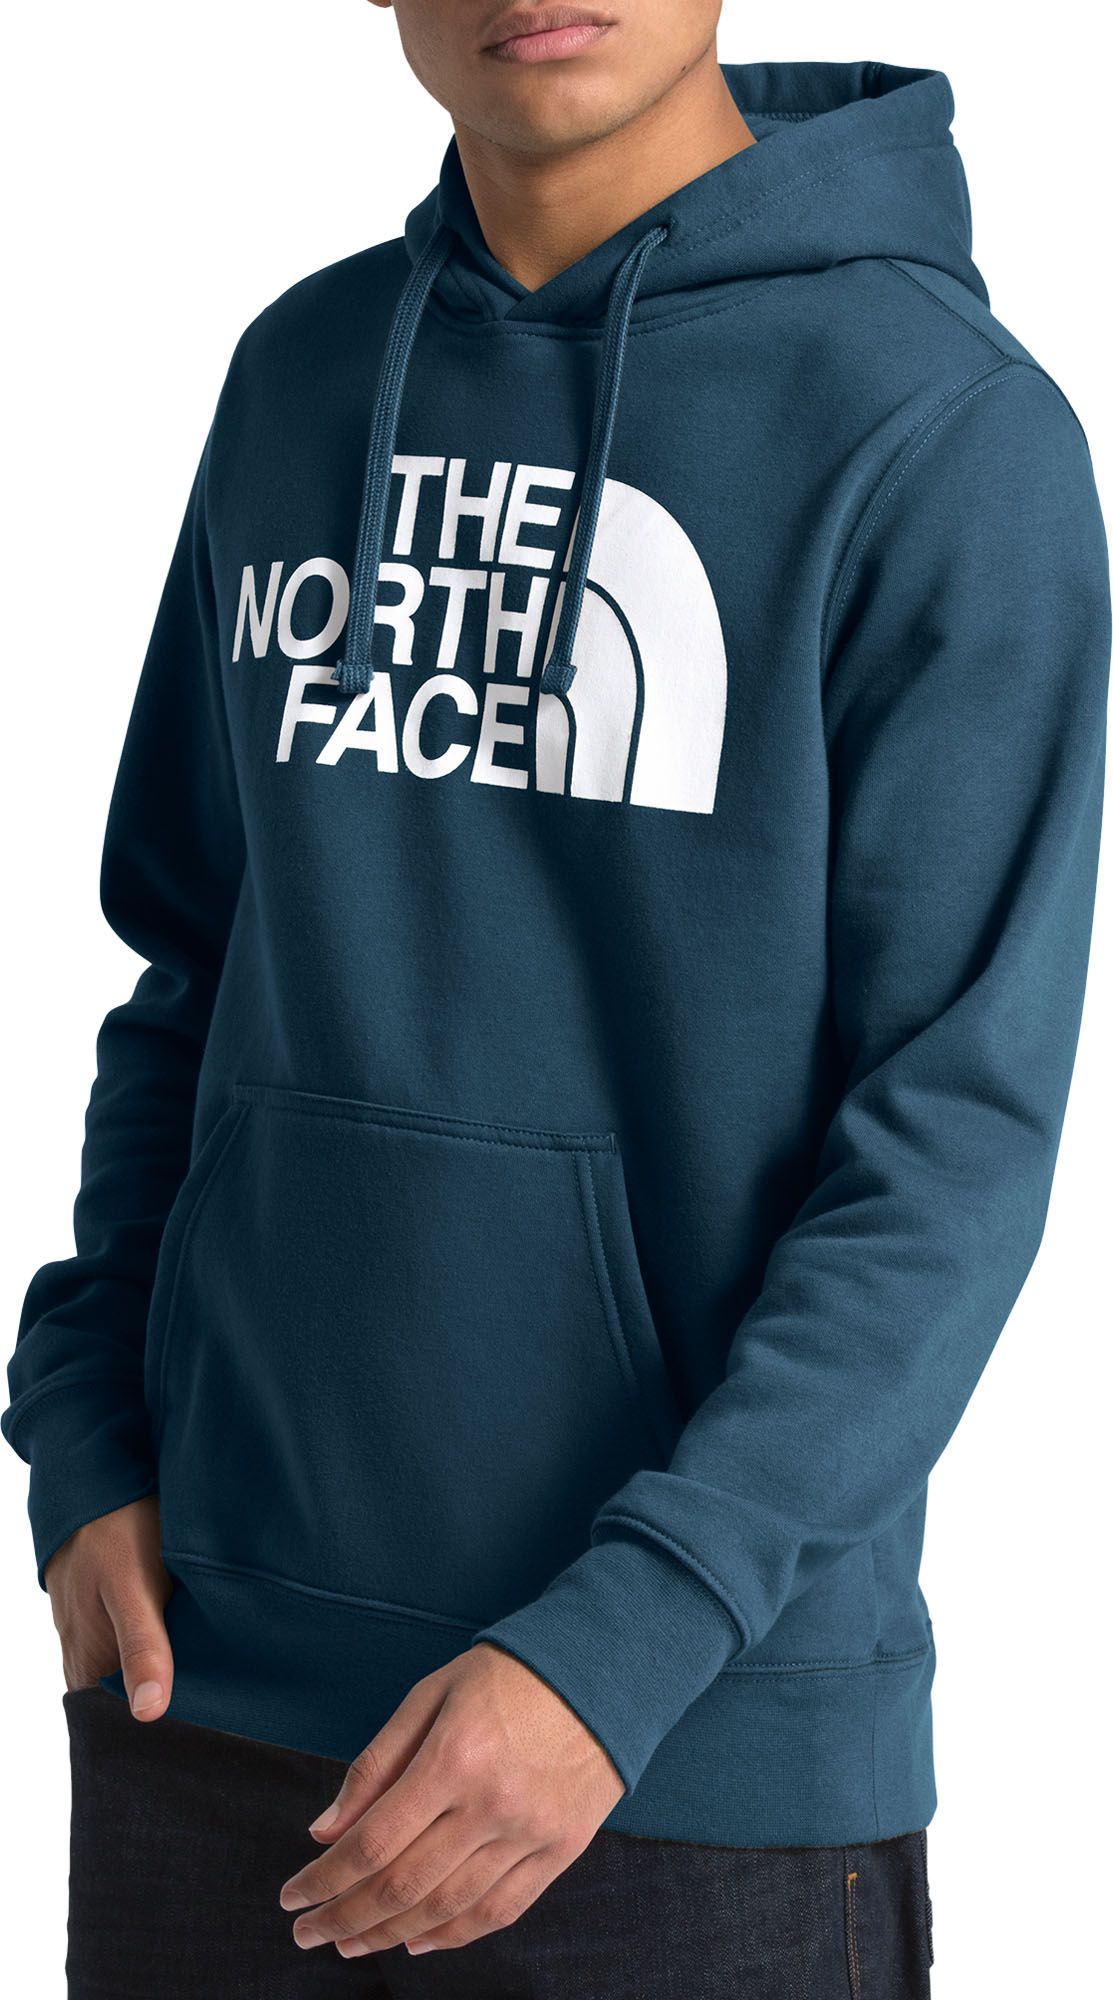 The North Face Men's Half Dome Fashion Hoodie - .97